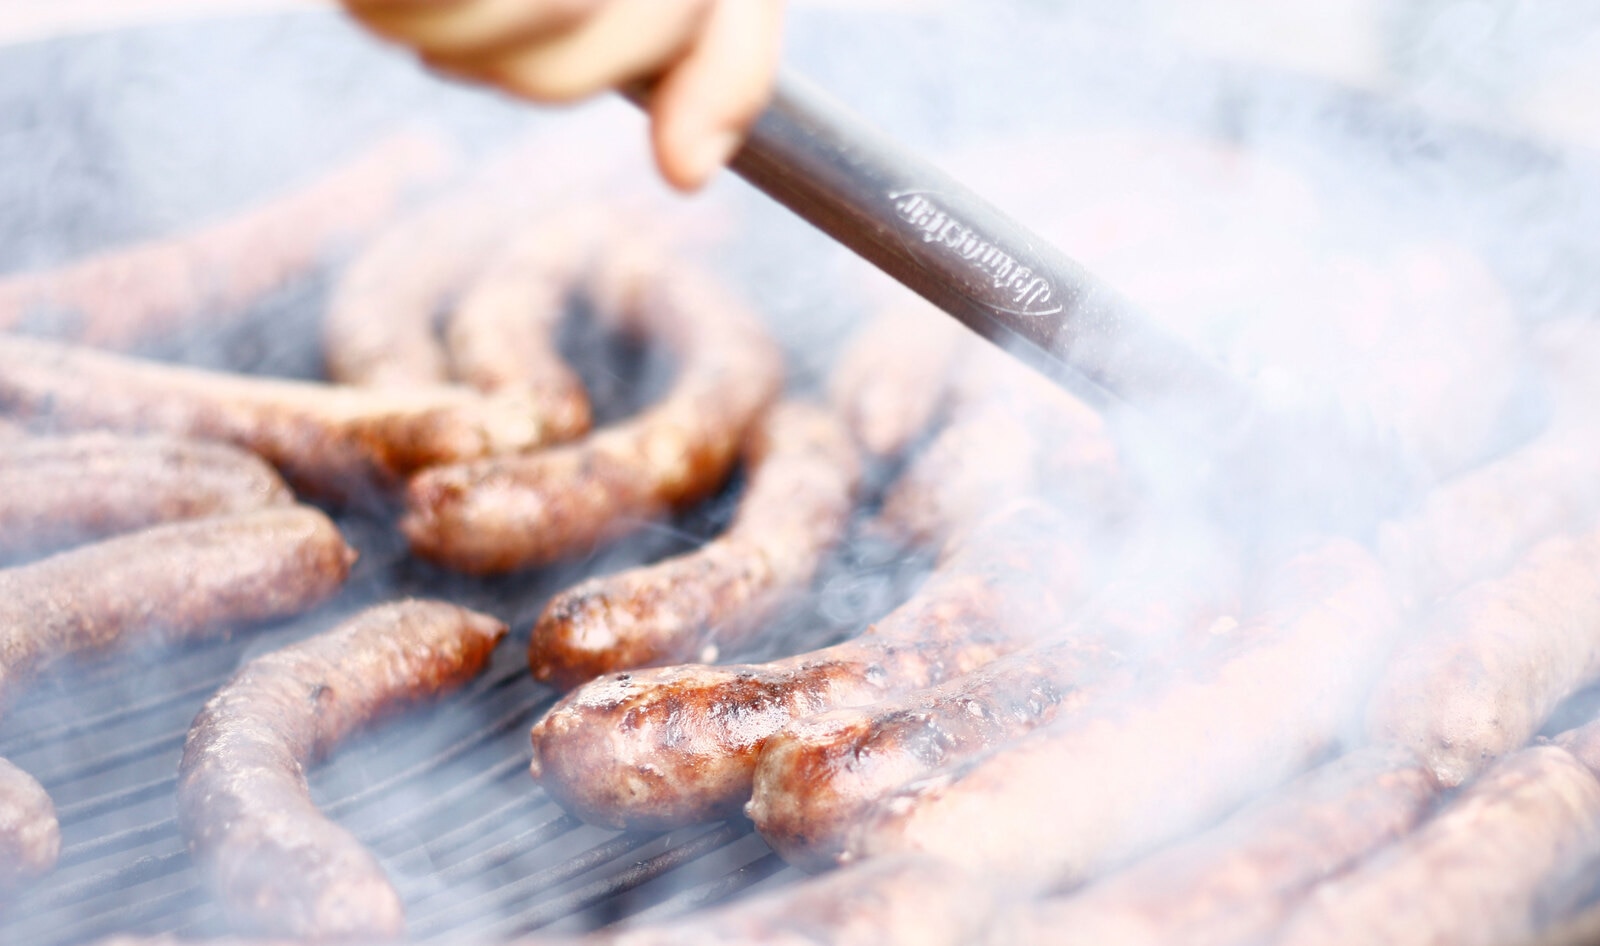 Sausage and Bacon Sales Drop in the UK Due to Health Concerns